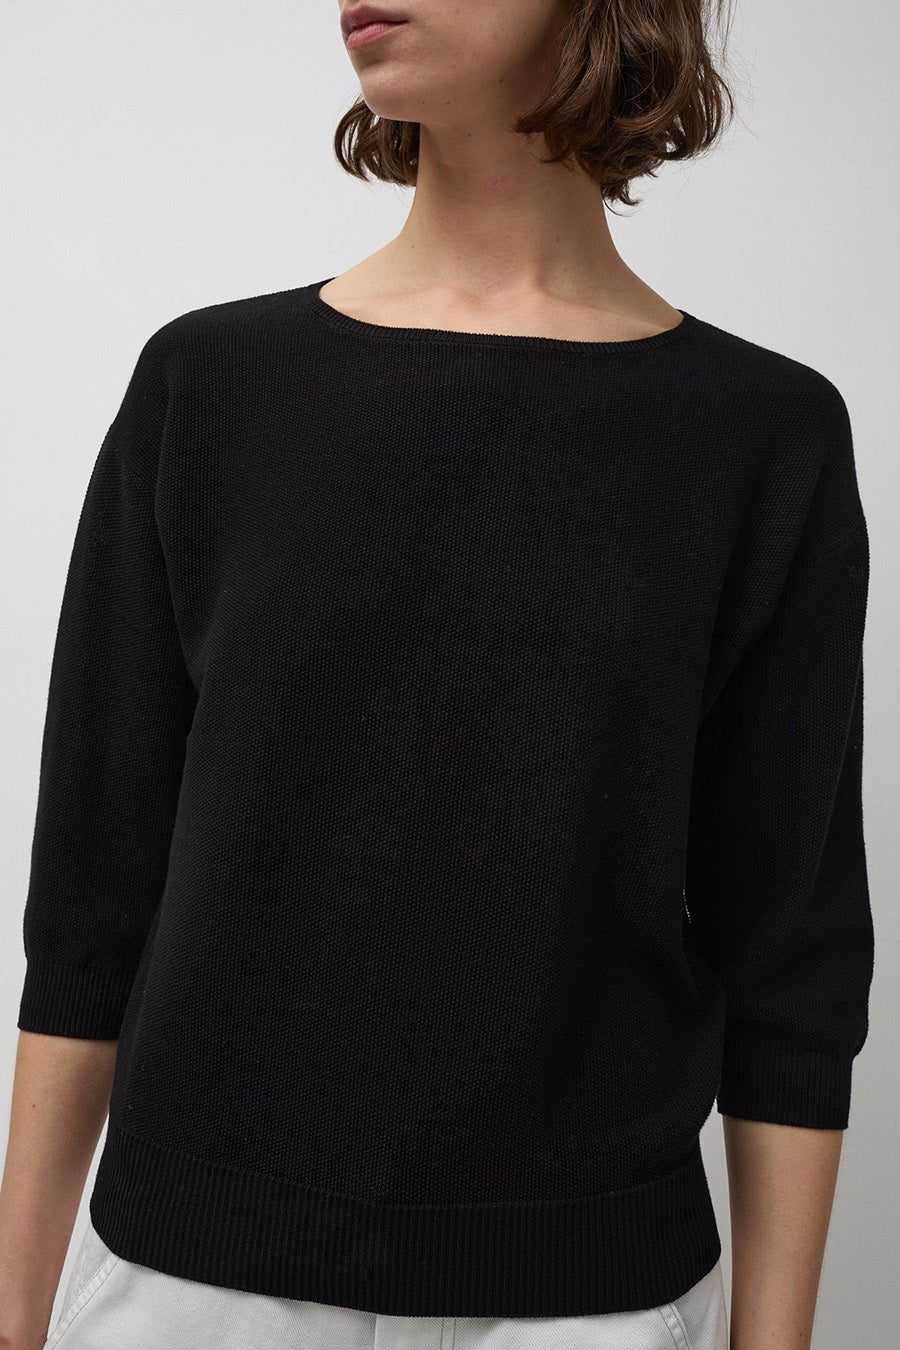 Rue Blanche Bees 34 Sleeve Top in Black